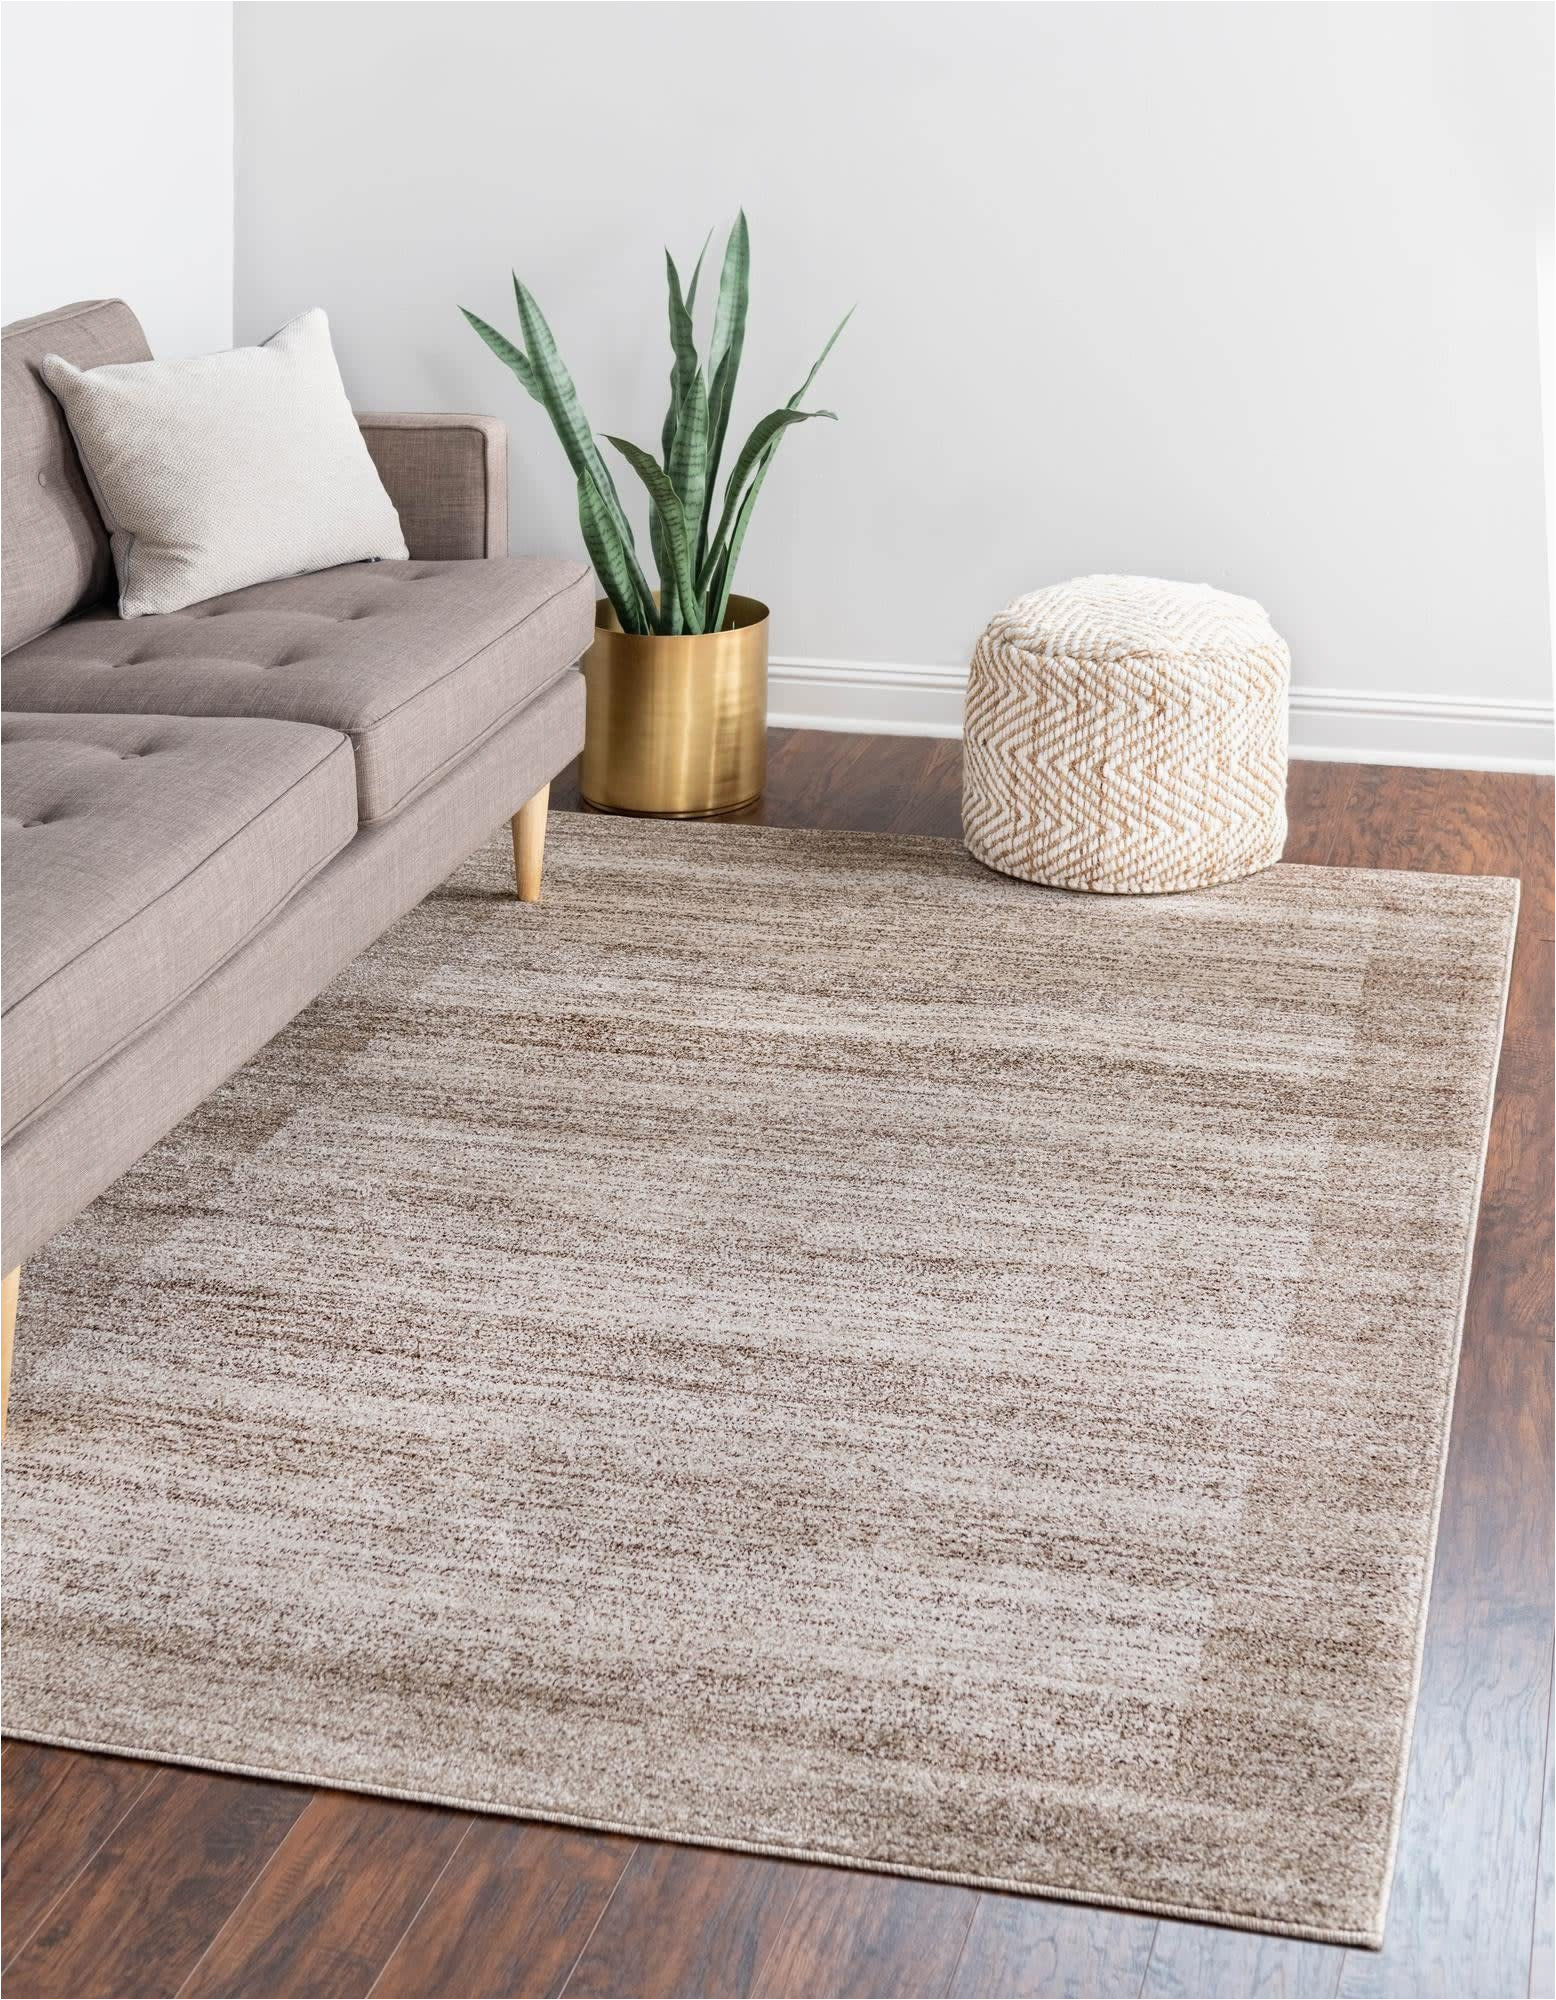 13 X 14 area Rugs Unique Loom Del Mar Collection area Rug-transitional Inspired with Modern Contemporary Design, 10′ 0 X 13′ 0 Rectangular, Beige/tan